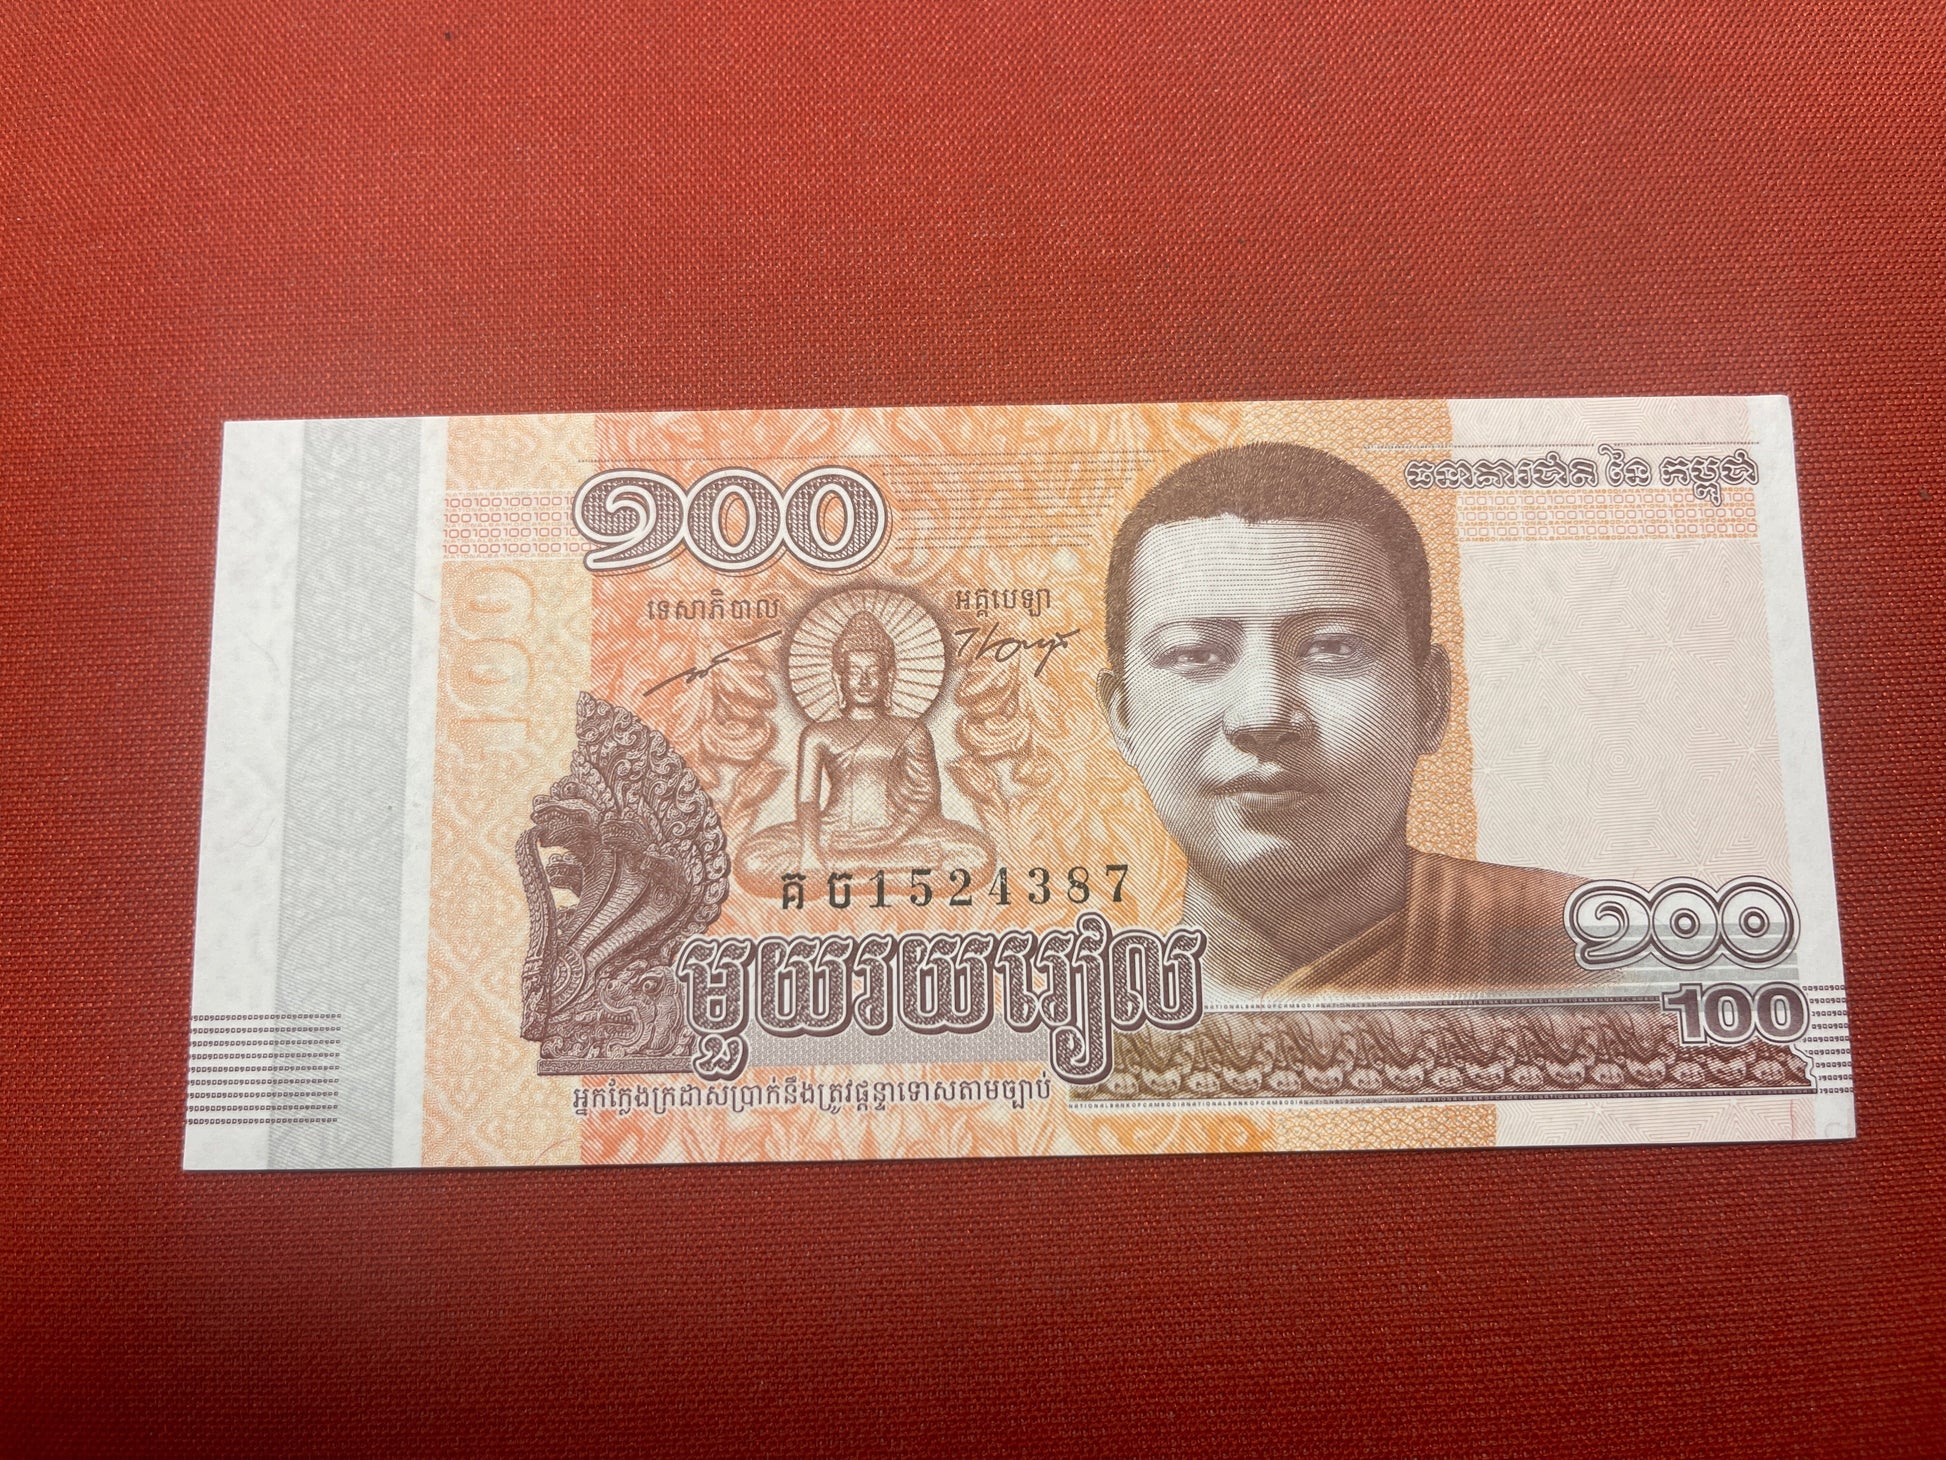  National Bank of Cambodia 100 Riels